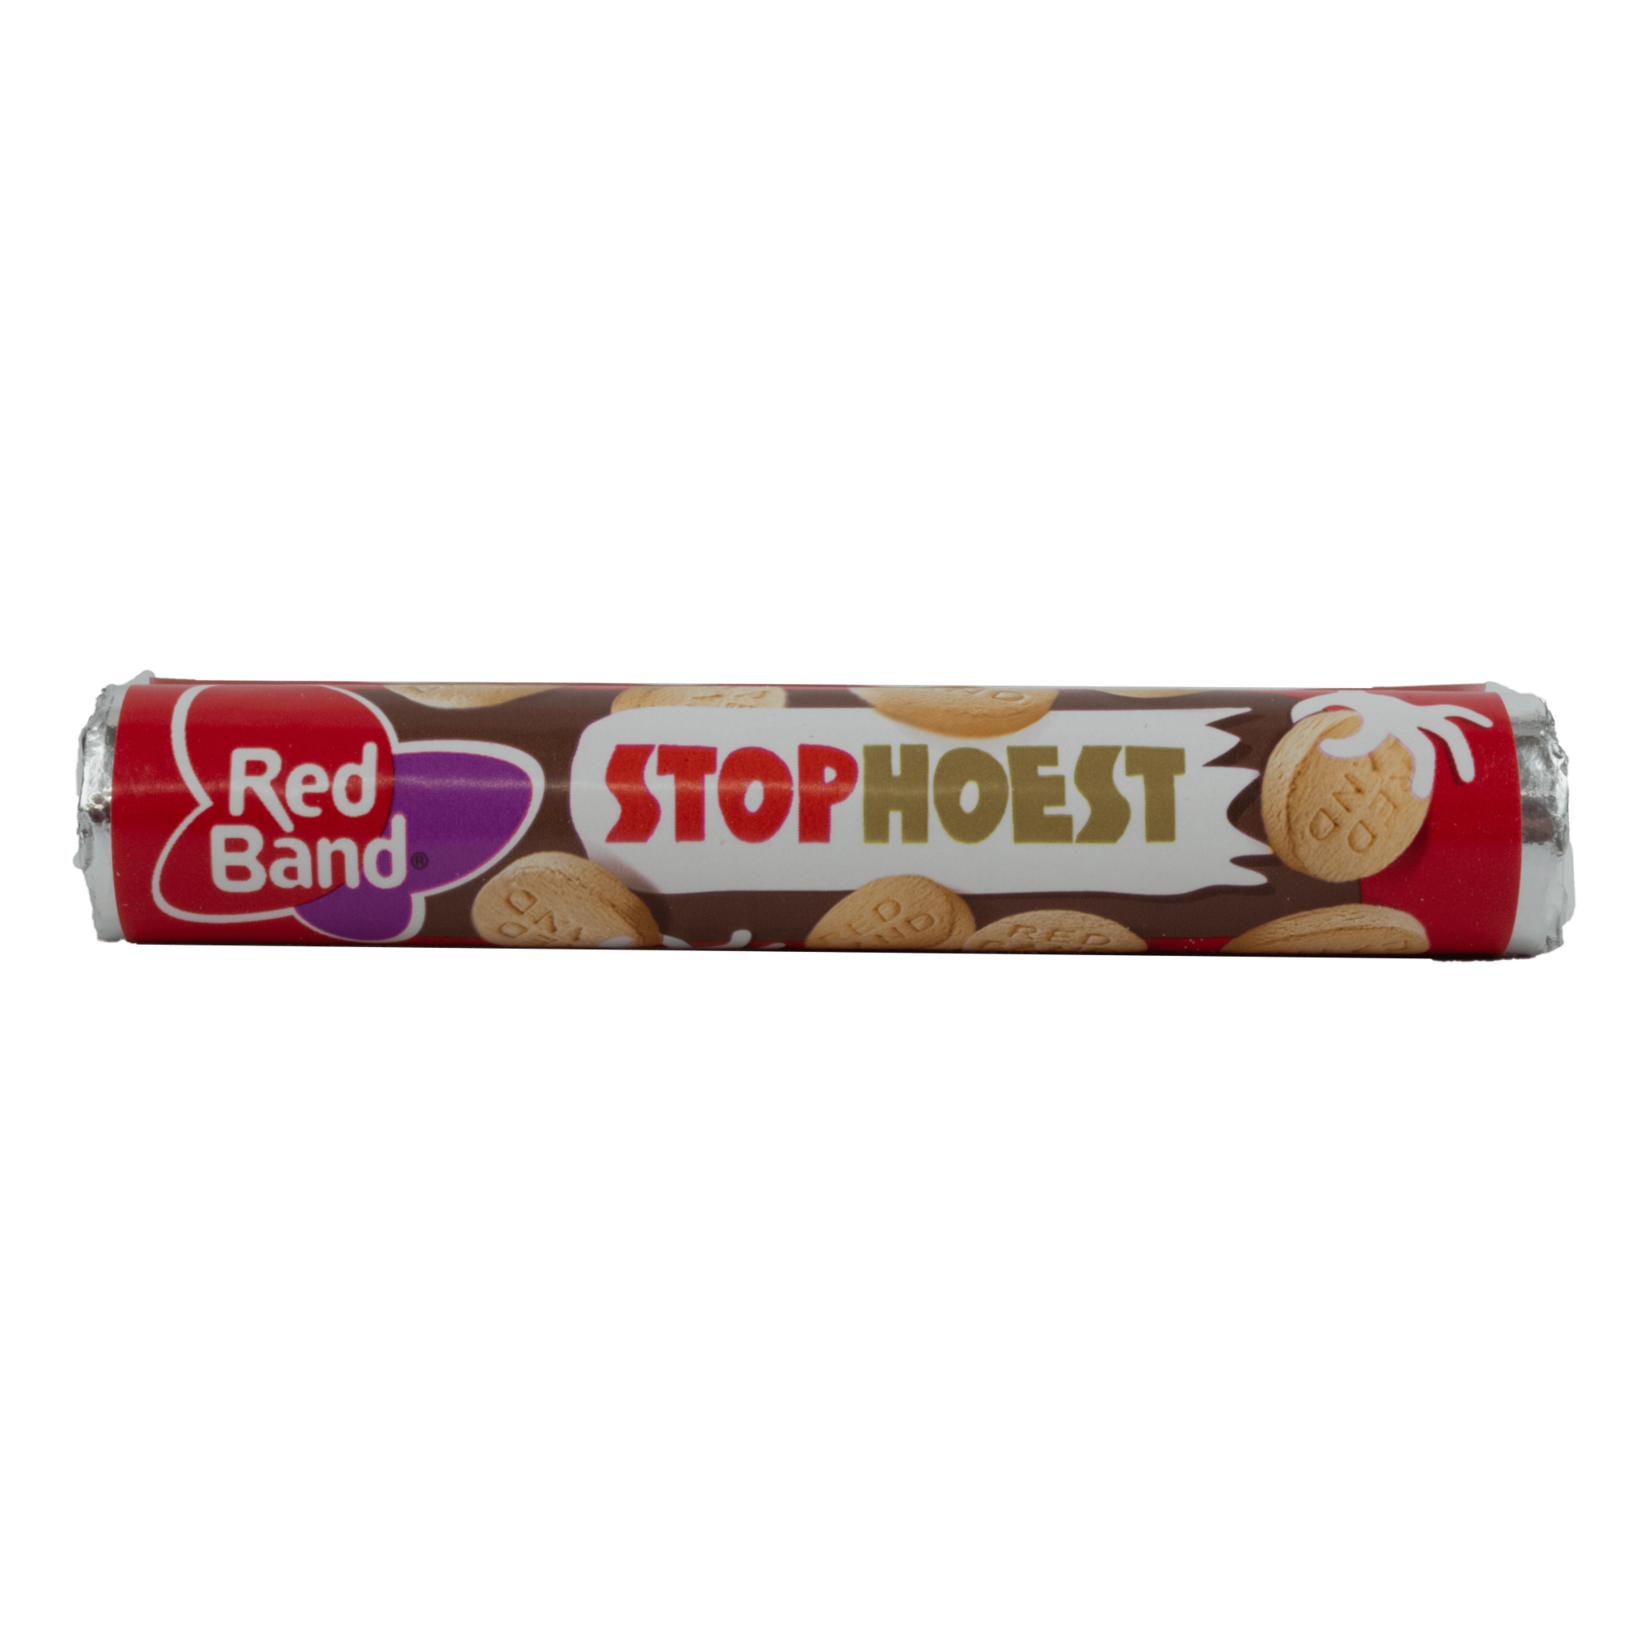 Red Band Red Band Stophoest Roll 40g